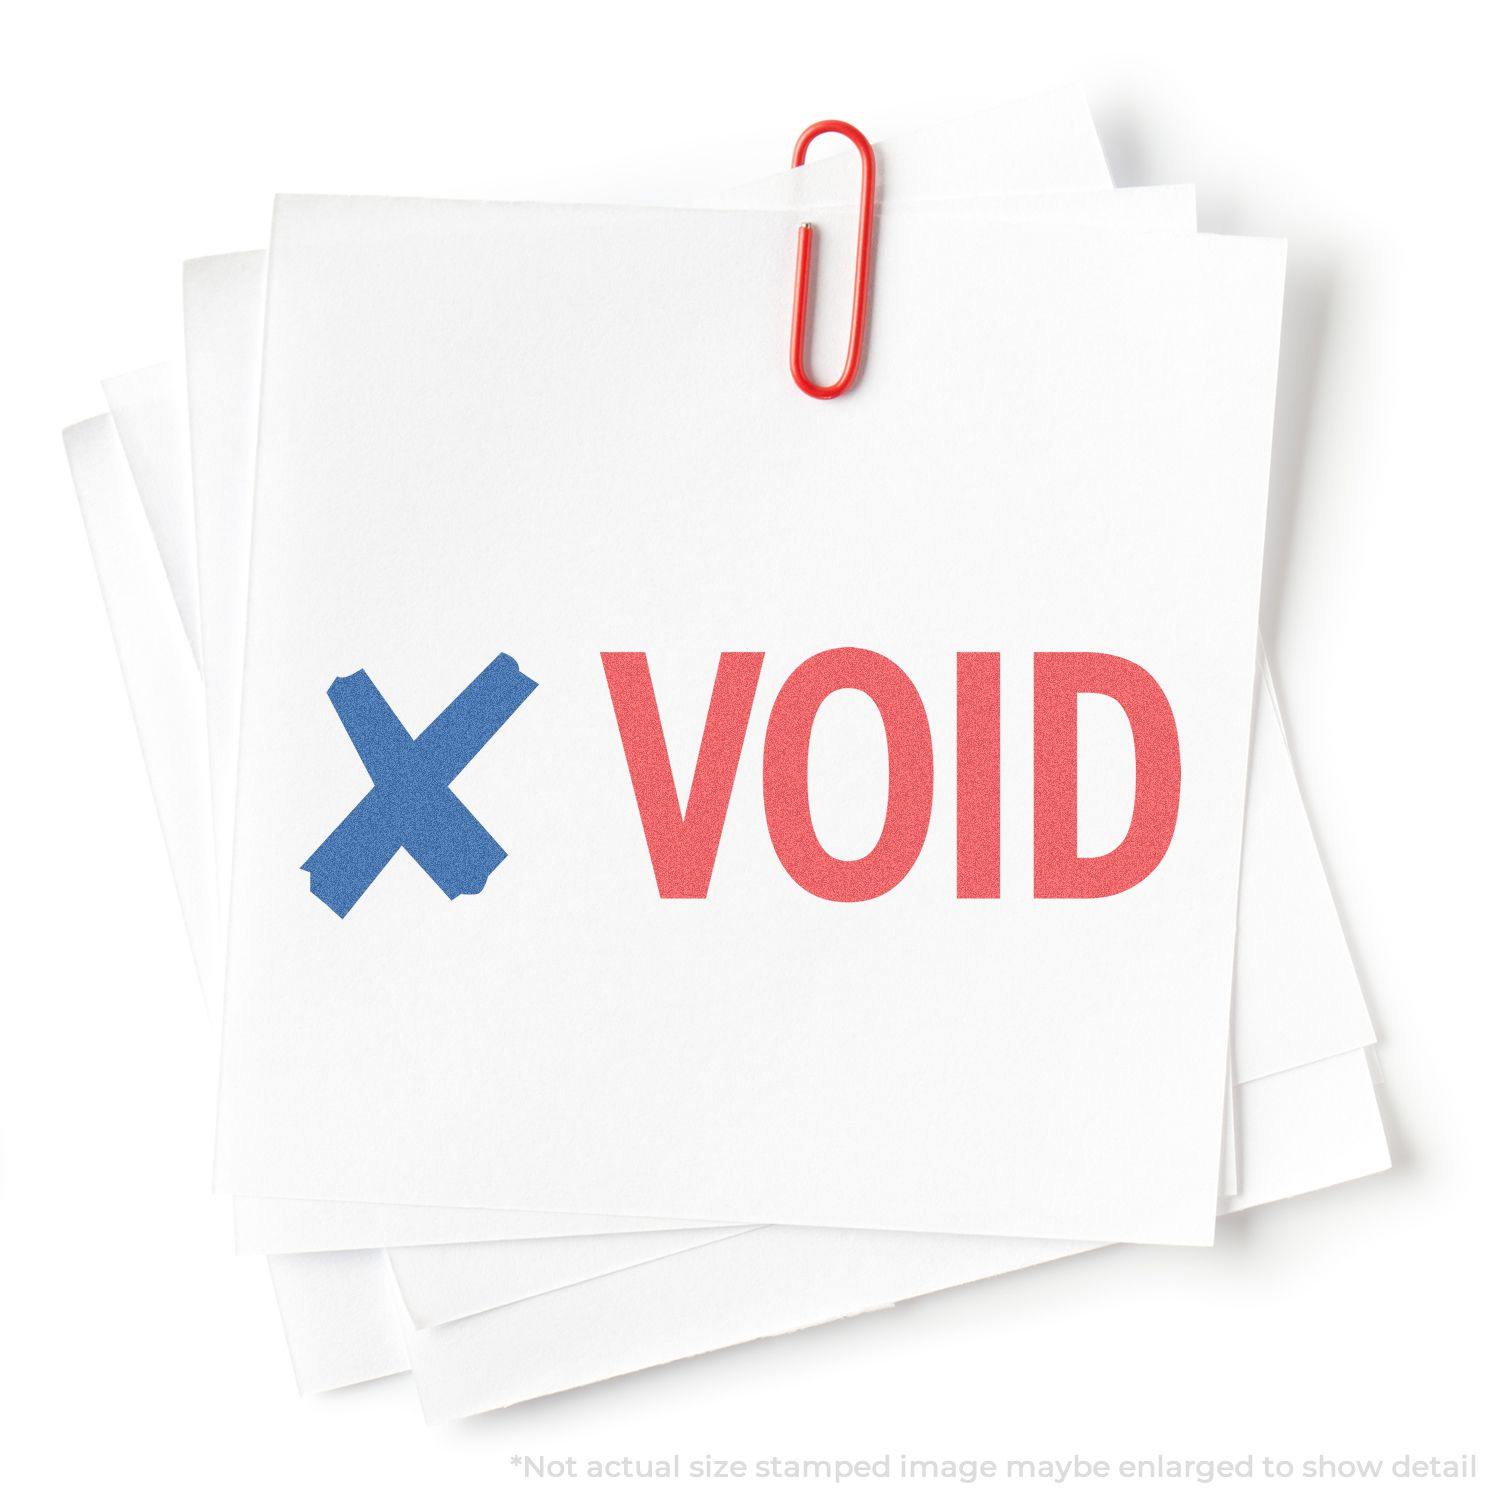 Two-color Void Xstamper Stamp Main Image